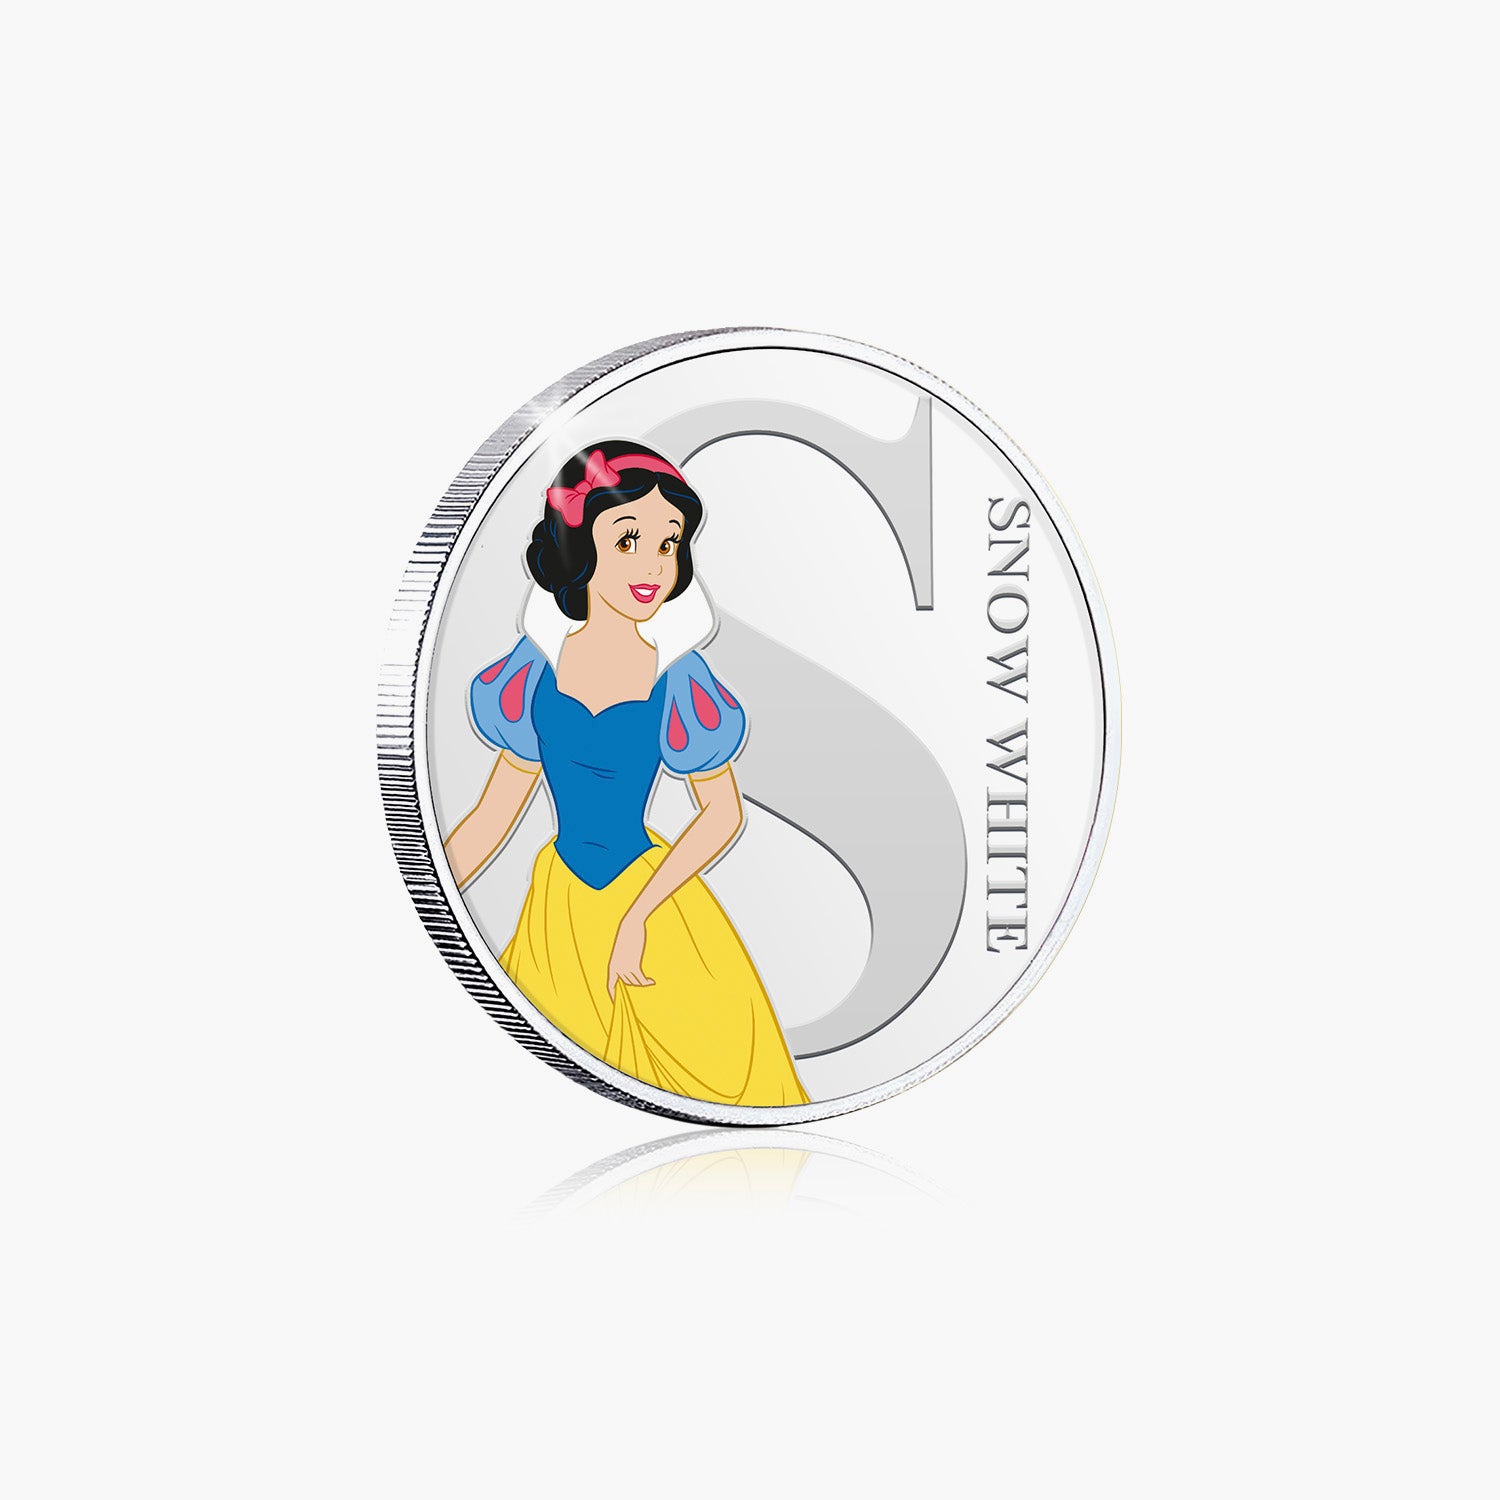 S is for Snow White Silver-Plated Full Colour Commemorative